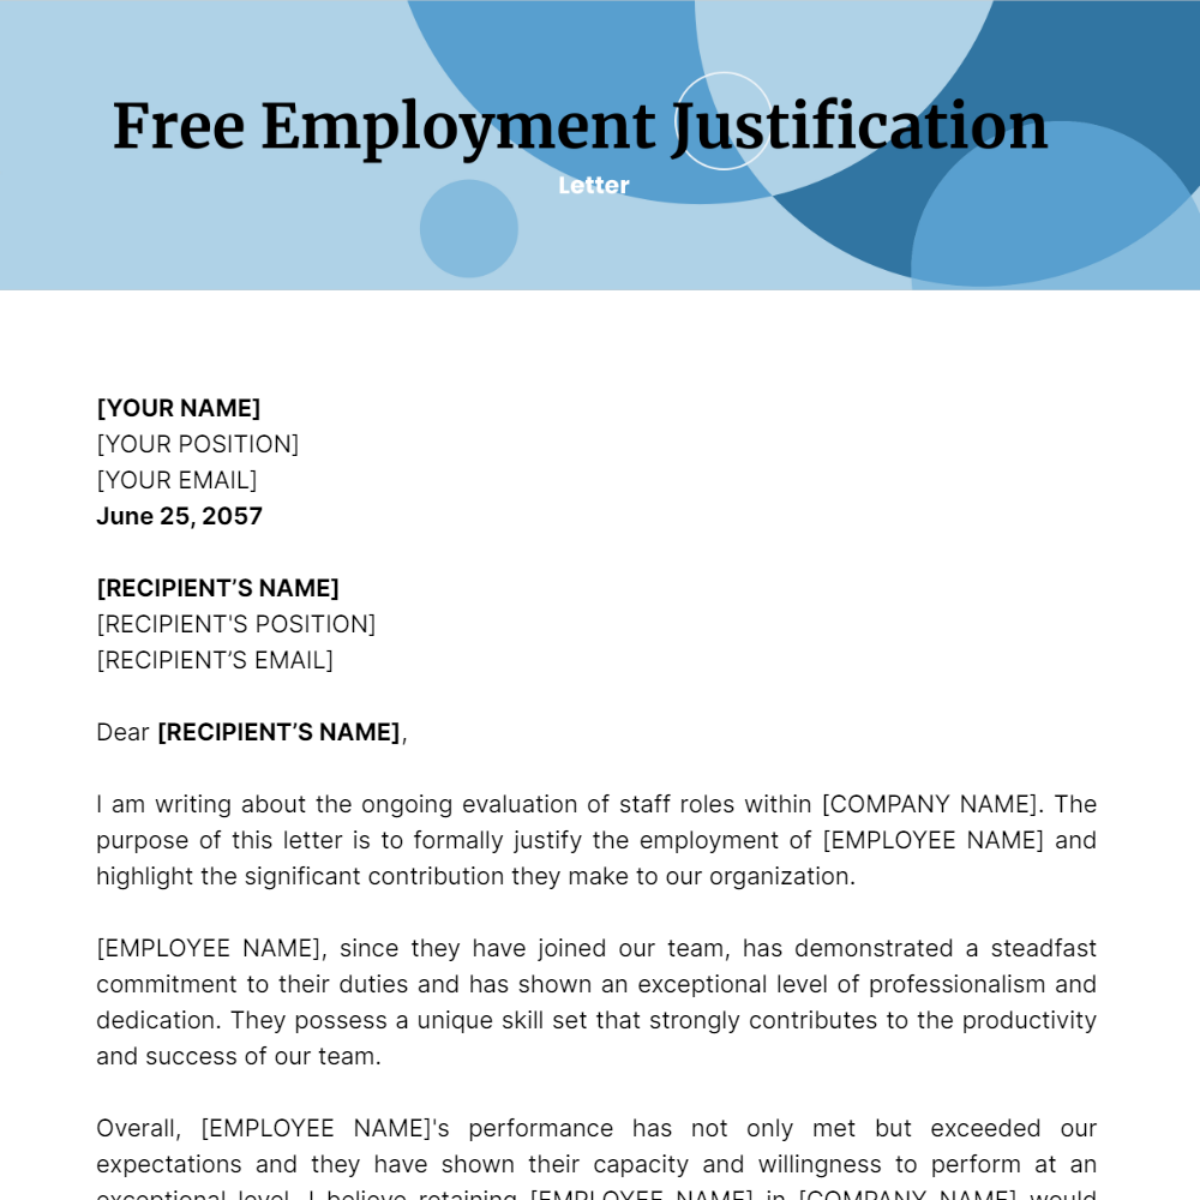 Employment Justification Letter Template